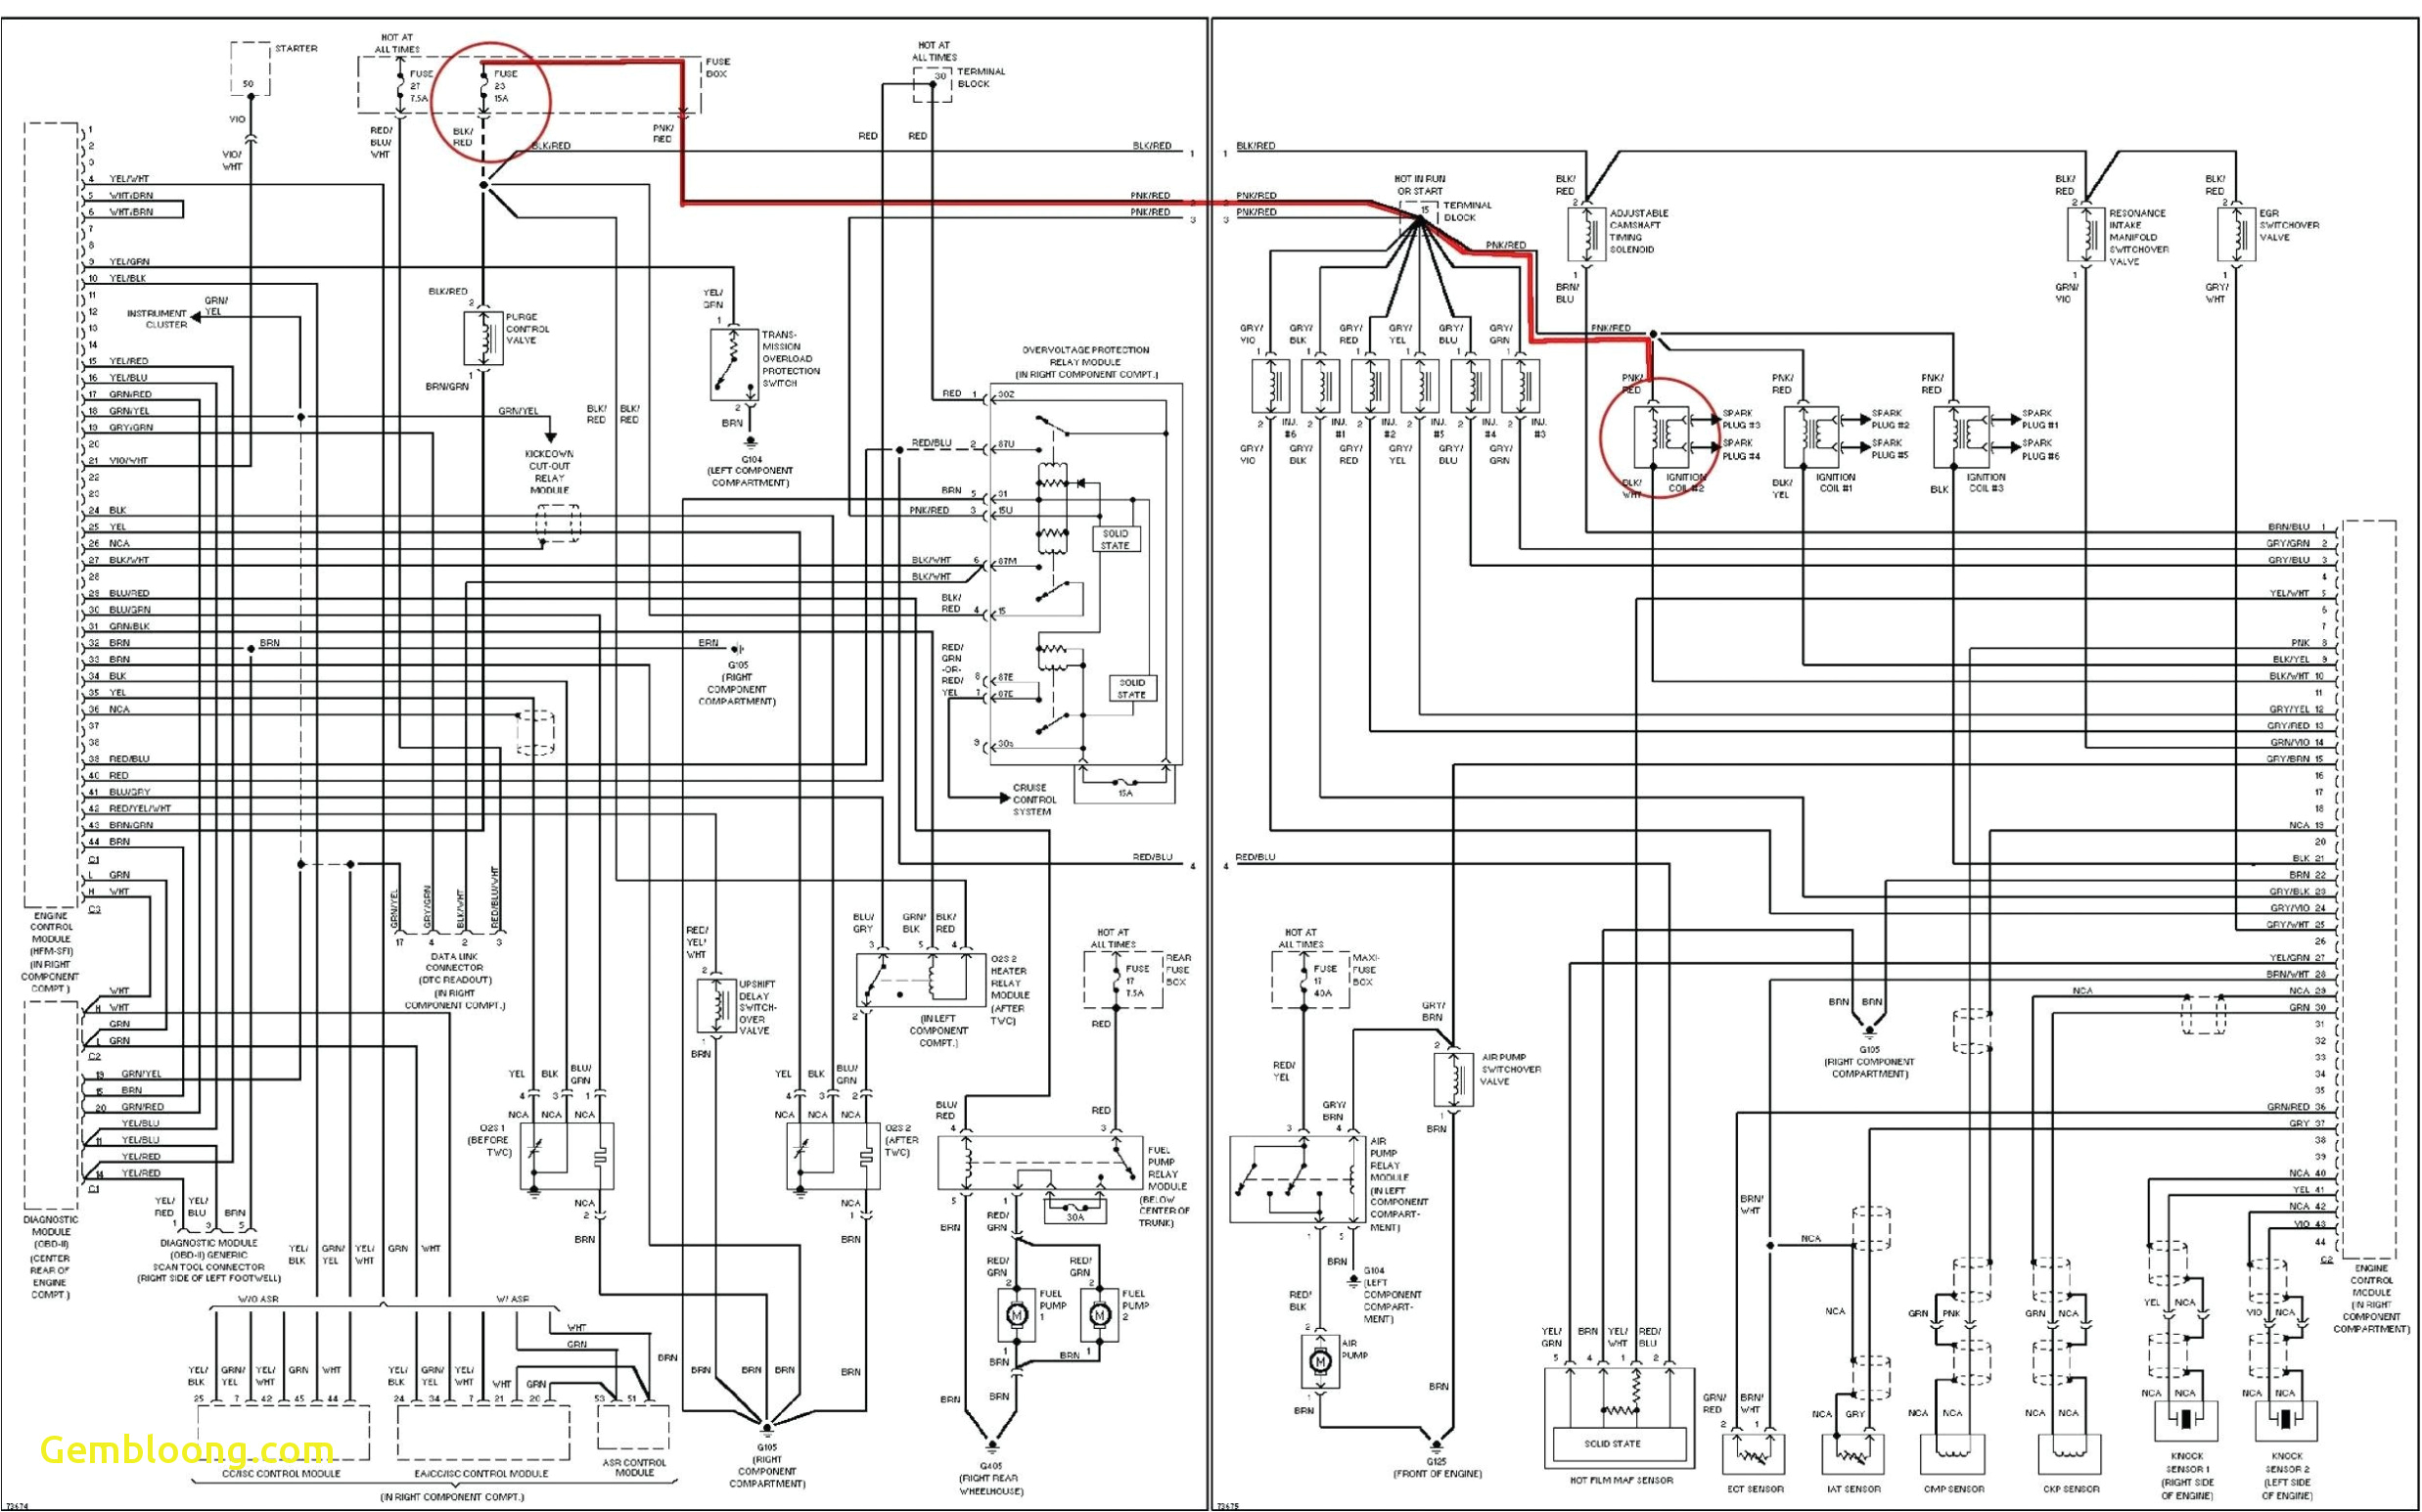 wiring diagram for mercedes wiring diagram ame mercedes benz c class w203 wiring diagram mercedes 400